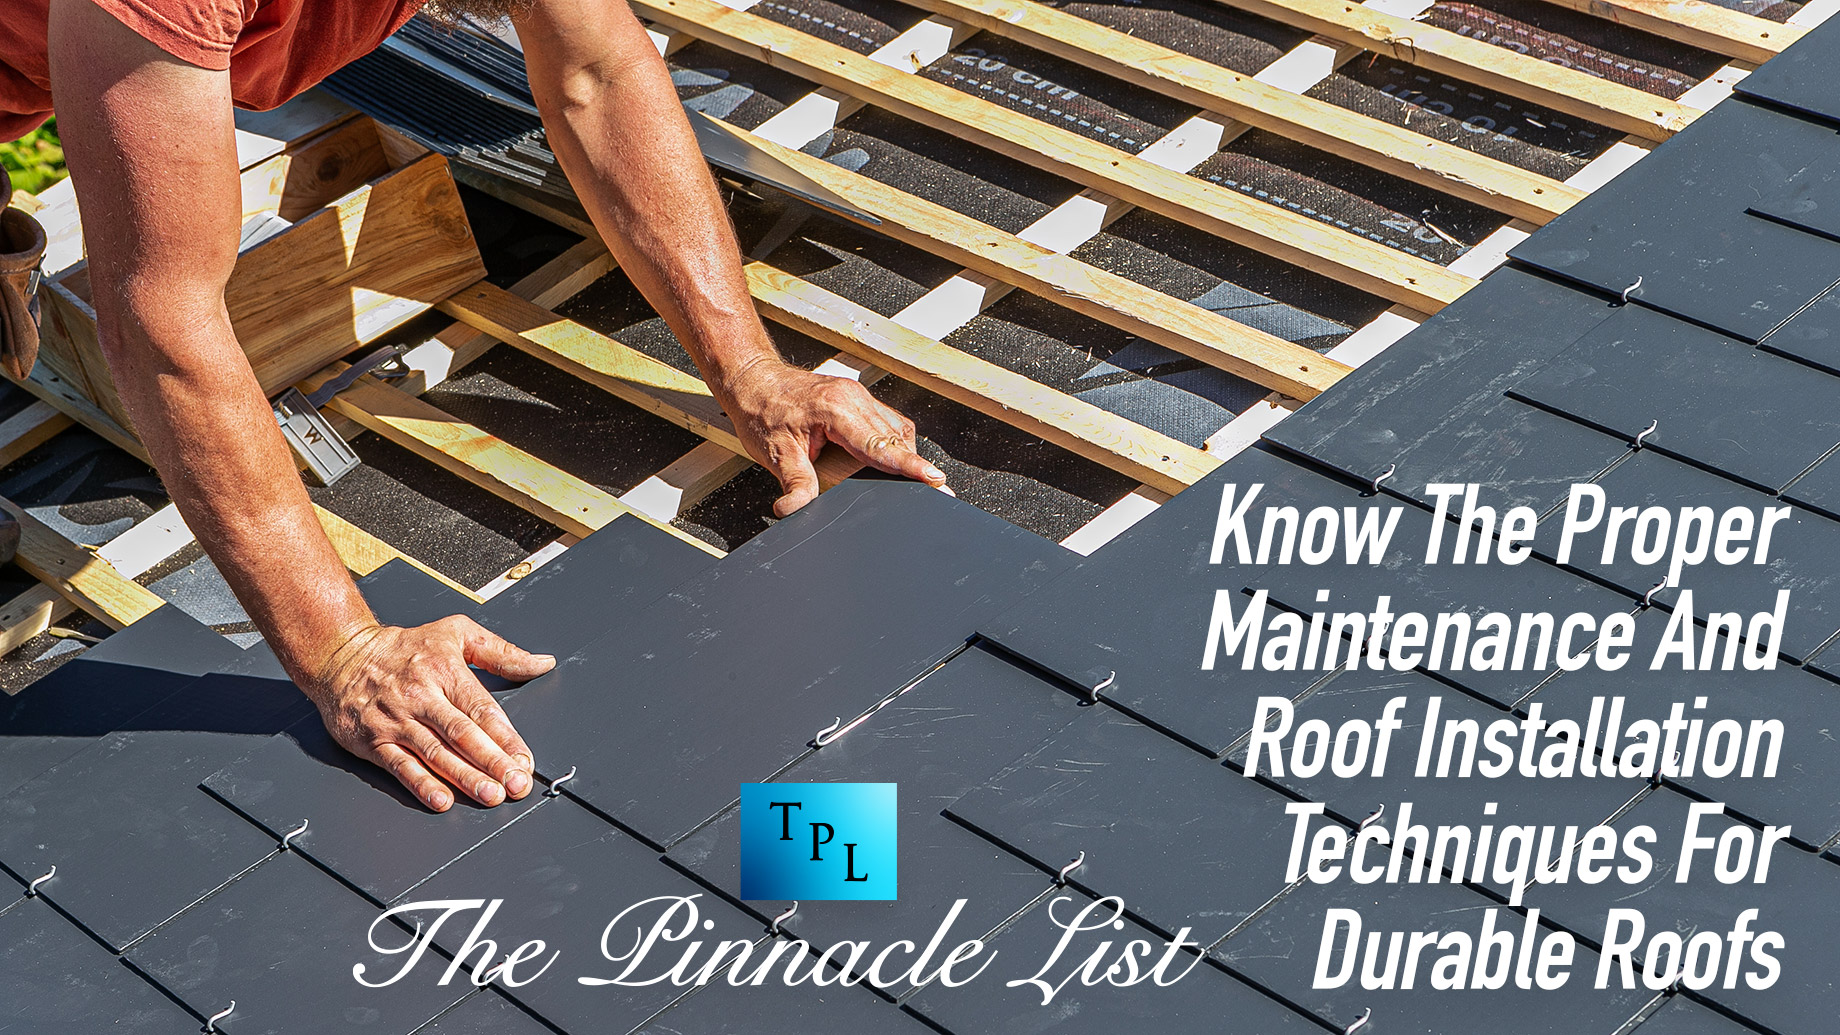 Know The Proper Maintenance And Roof Installation Techniques For Durable Roofs